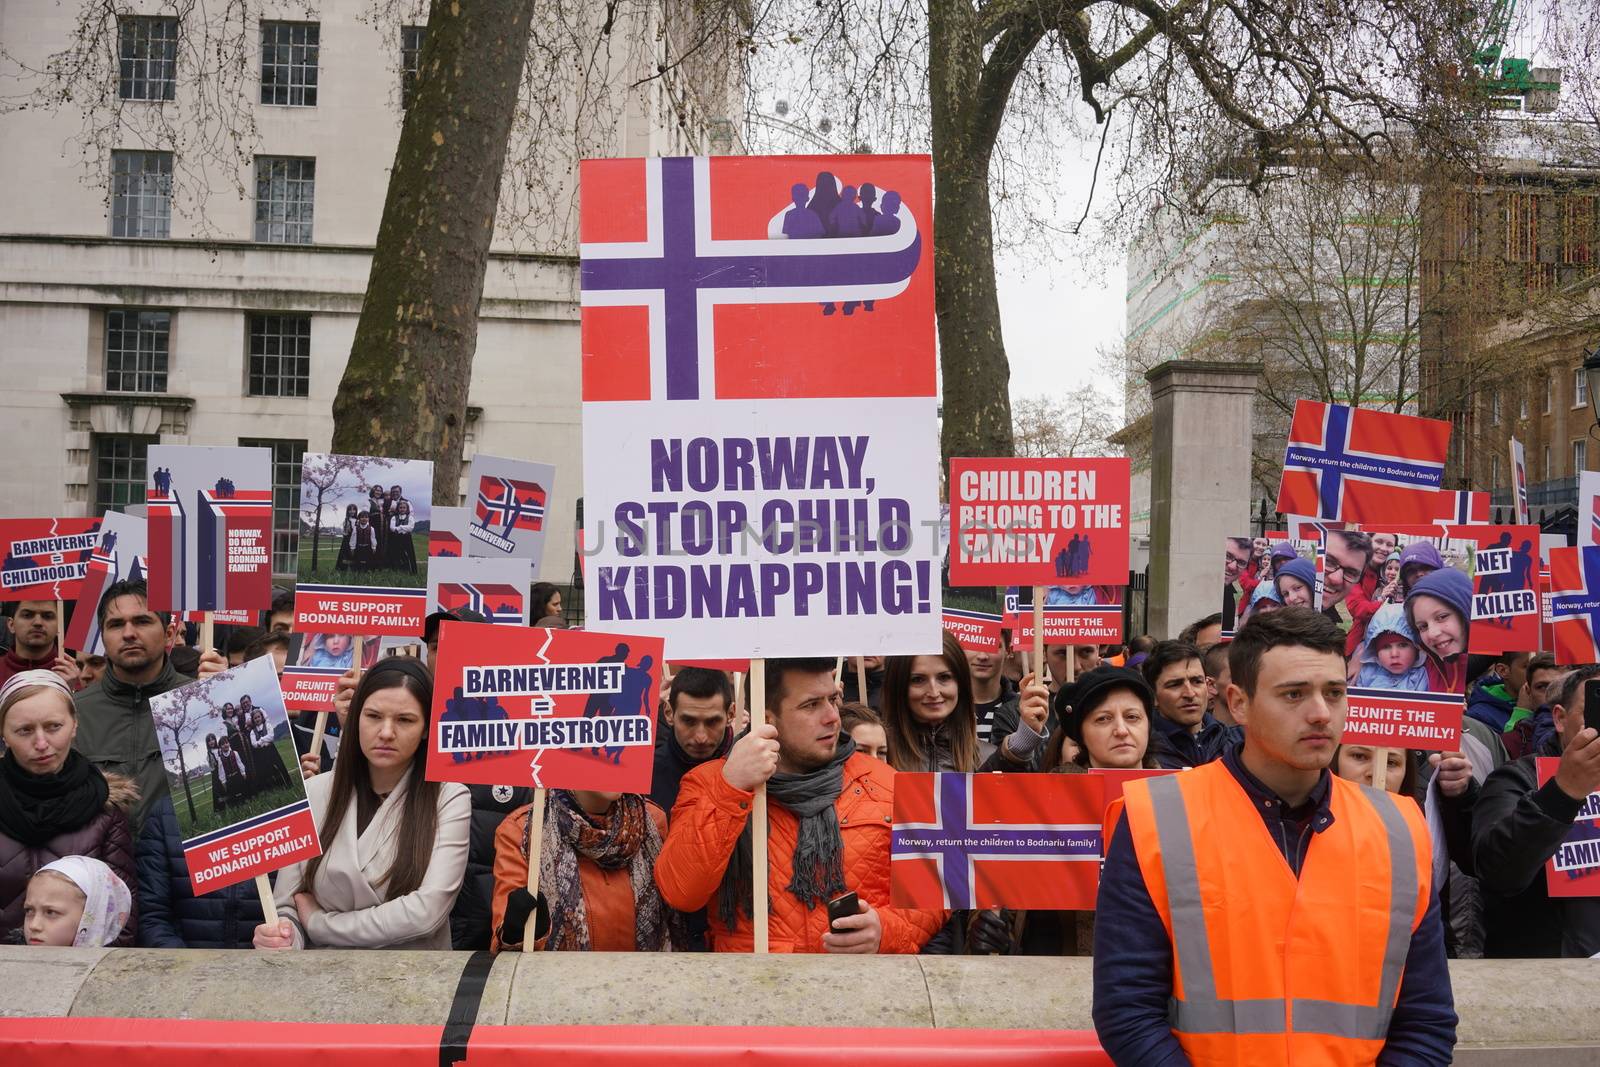 UNITED KINGDOM, London: Protesters hold placards reading Norway stop child kidnapping during a demonstration to condemn legal kidnapping in Norway, in London, UK, on April 16, 2016. 